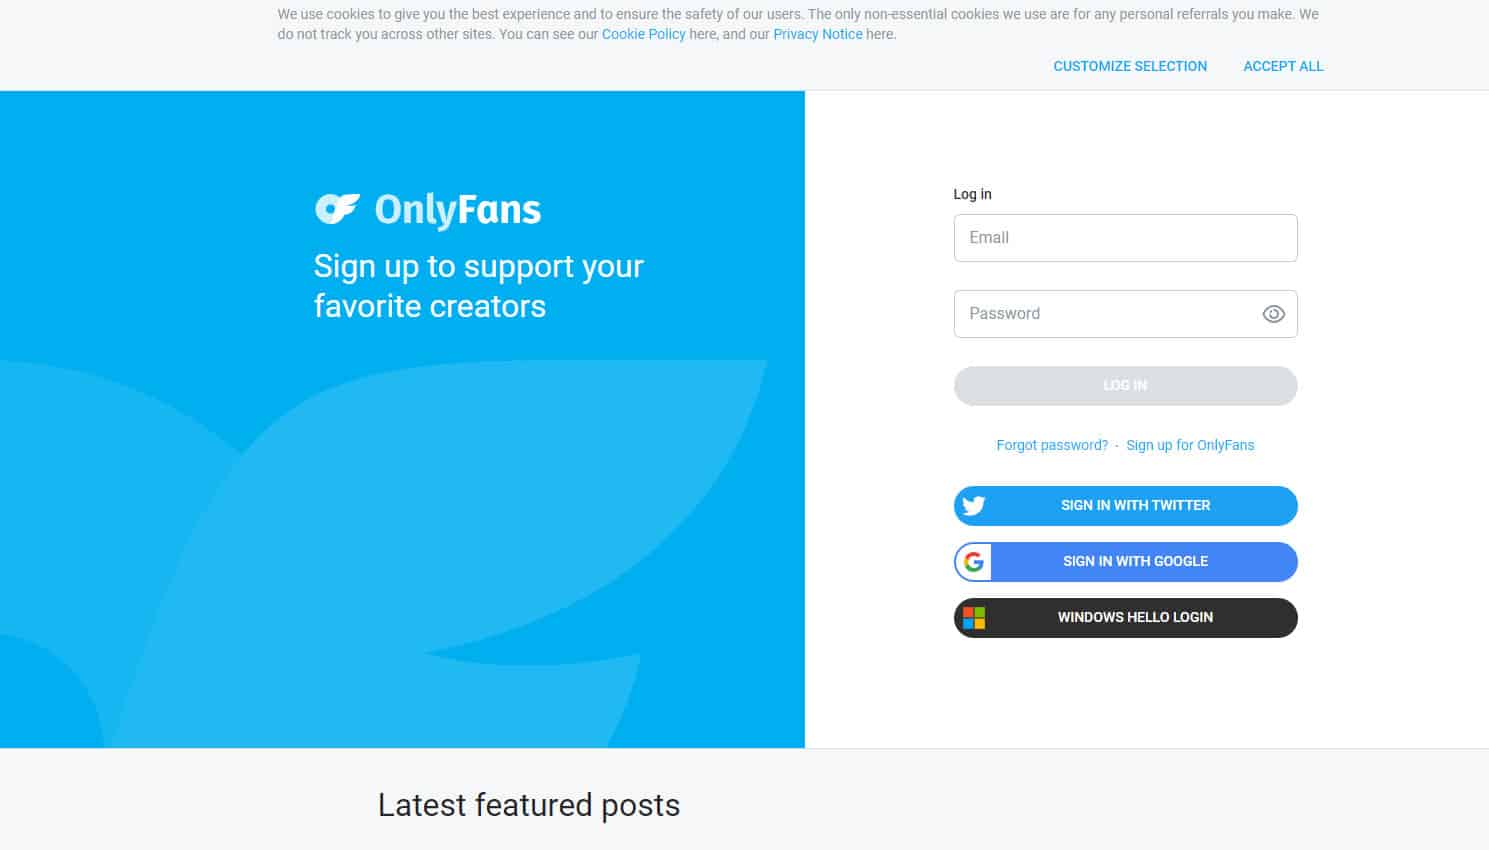 How To Cancel A Free Subscription On Onlyfans